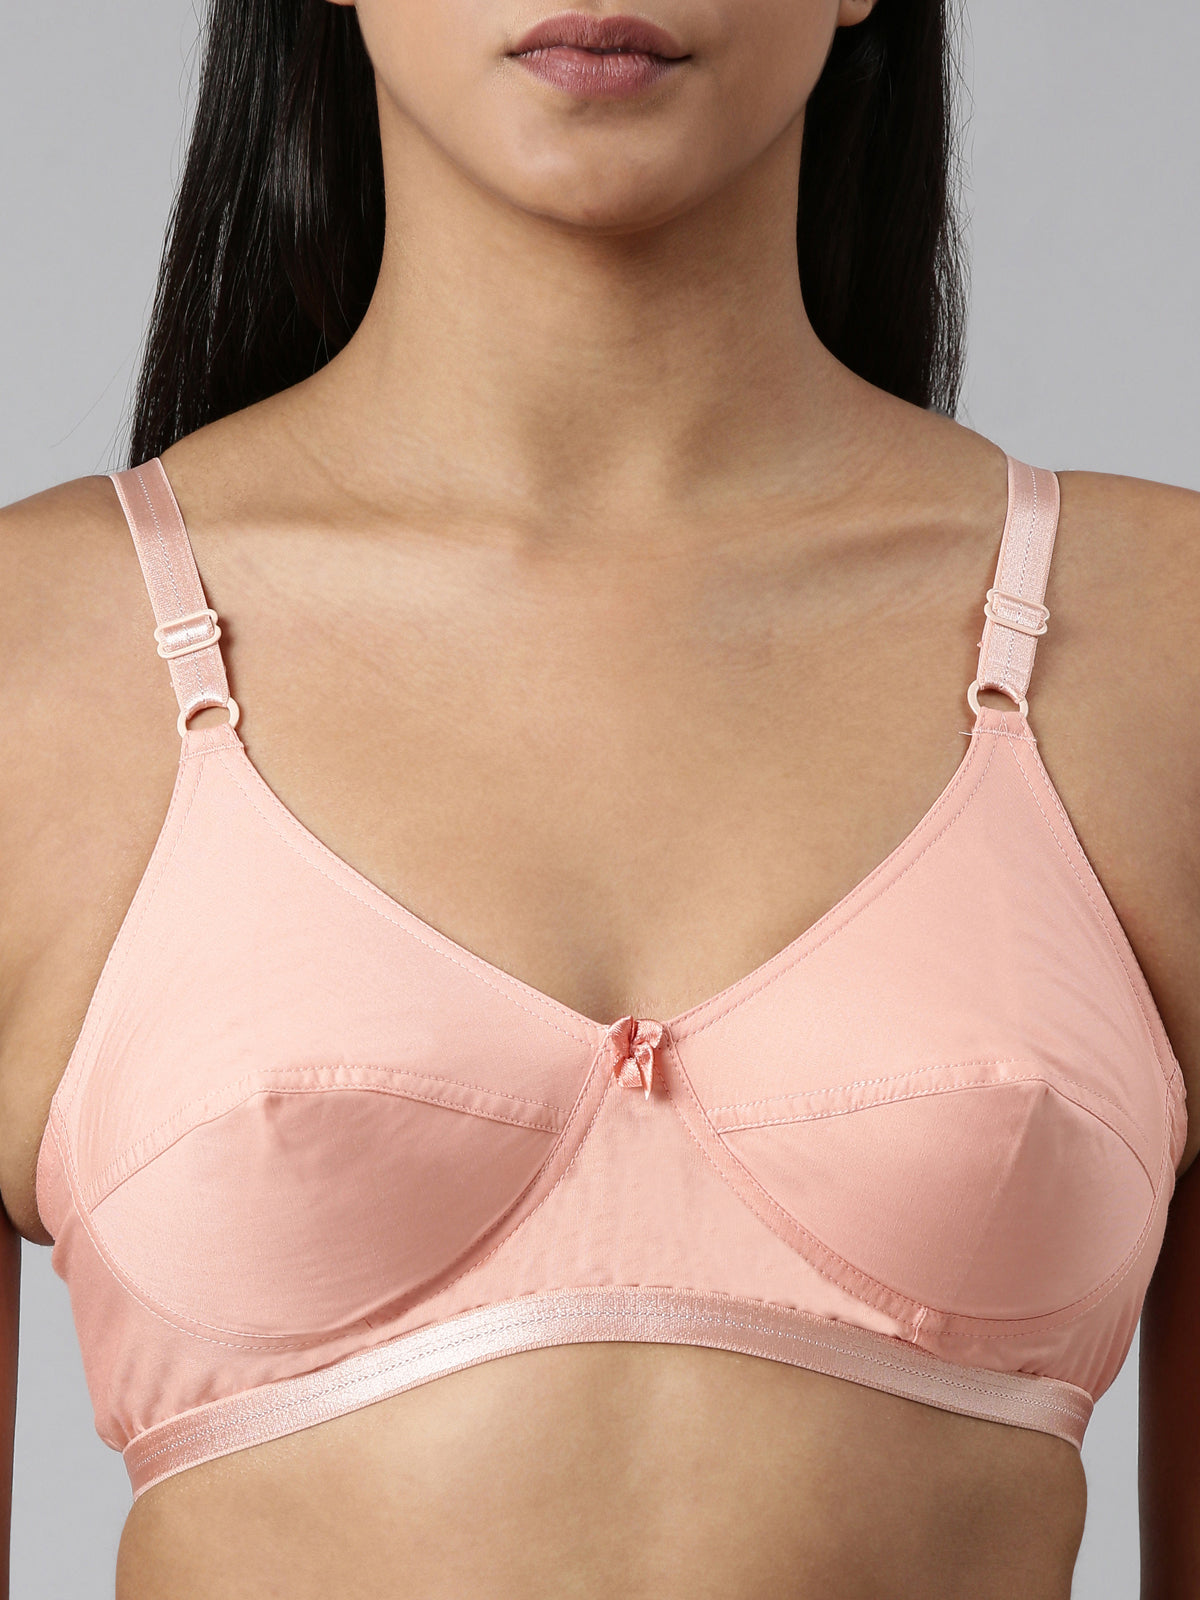 blossom-a6 thin-pink2-Woven Cotton-everyday bra